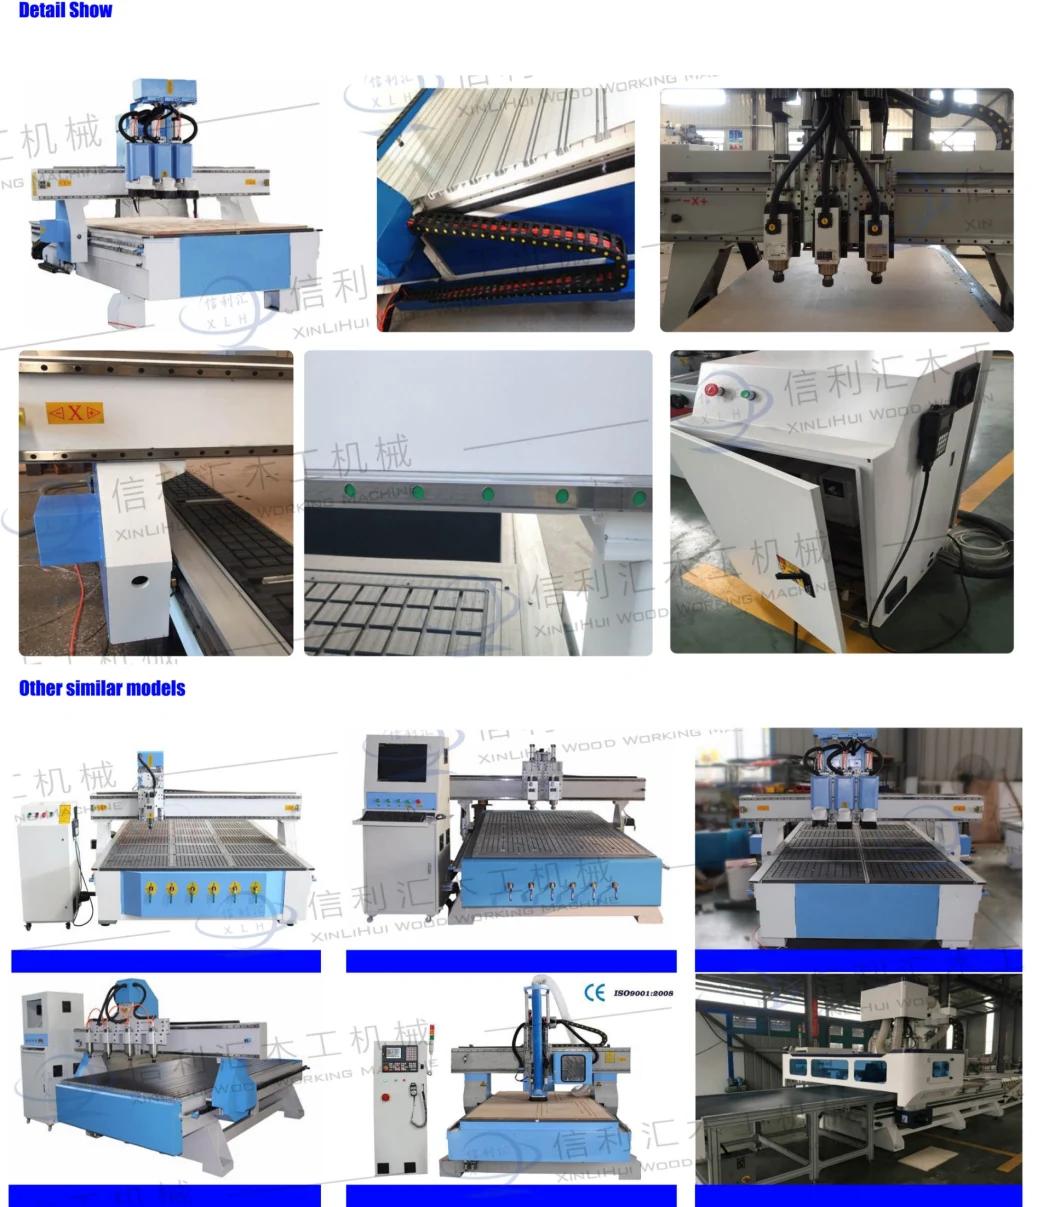 Cheap 3 Heads CNC Machine Price List Germany Technology Mini CNC Router Machine for Processing Aluminum/Wood/Acrylic Woodworking Machine Curve Office Furniture